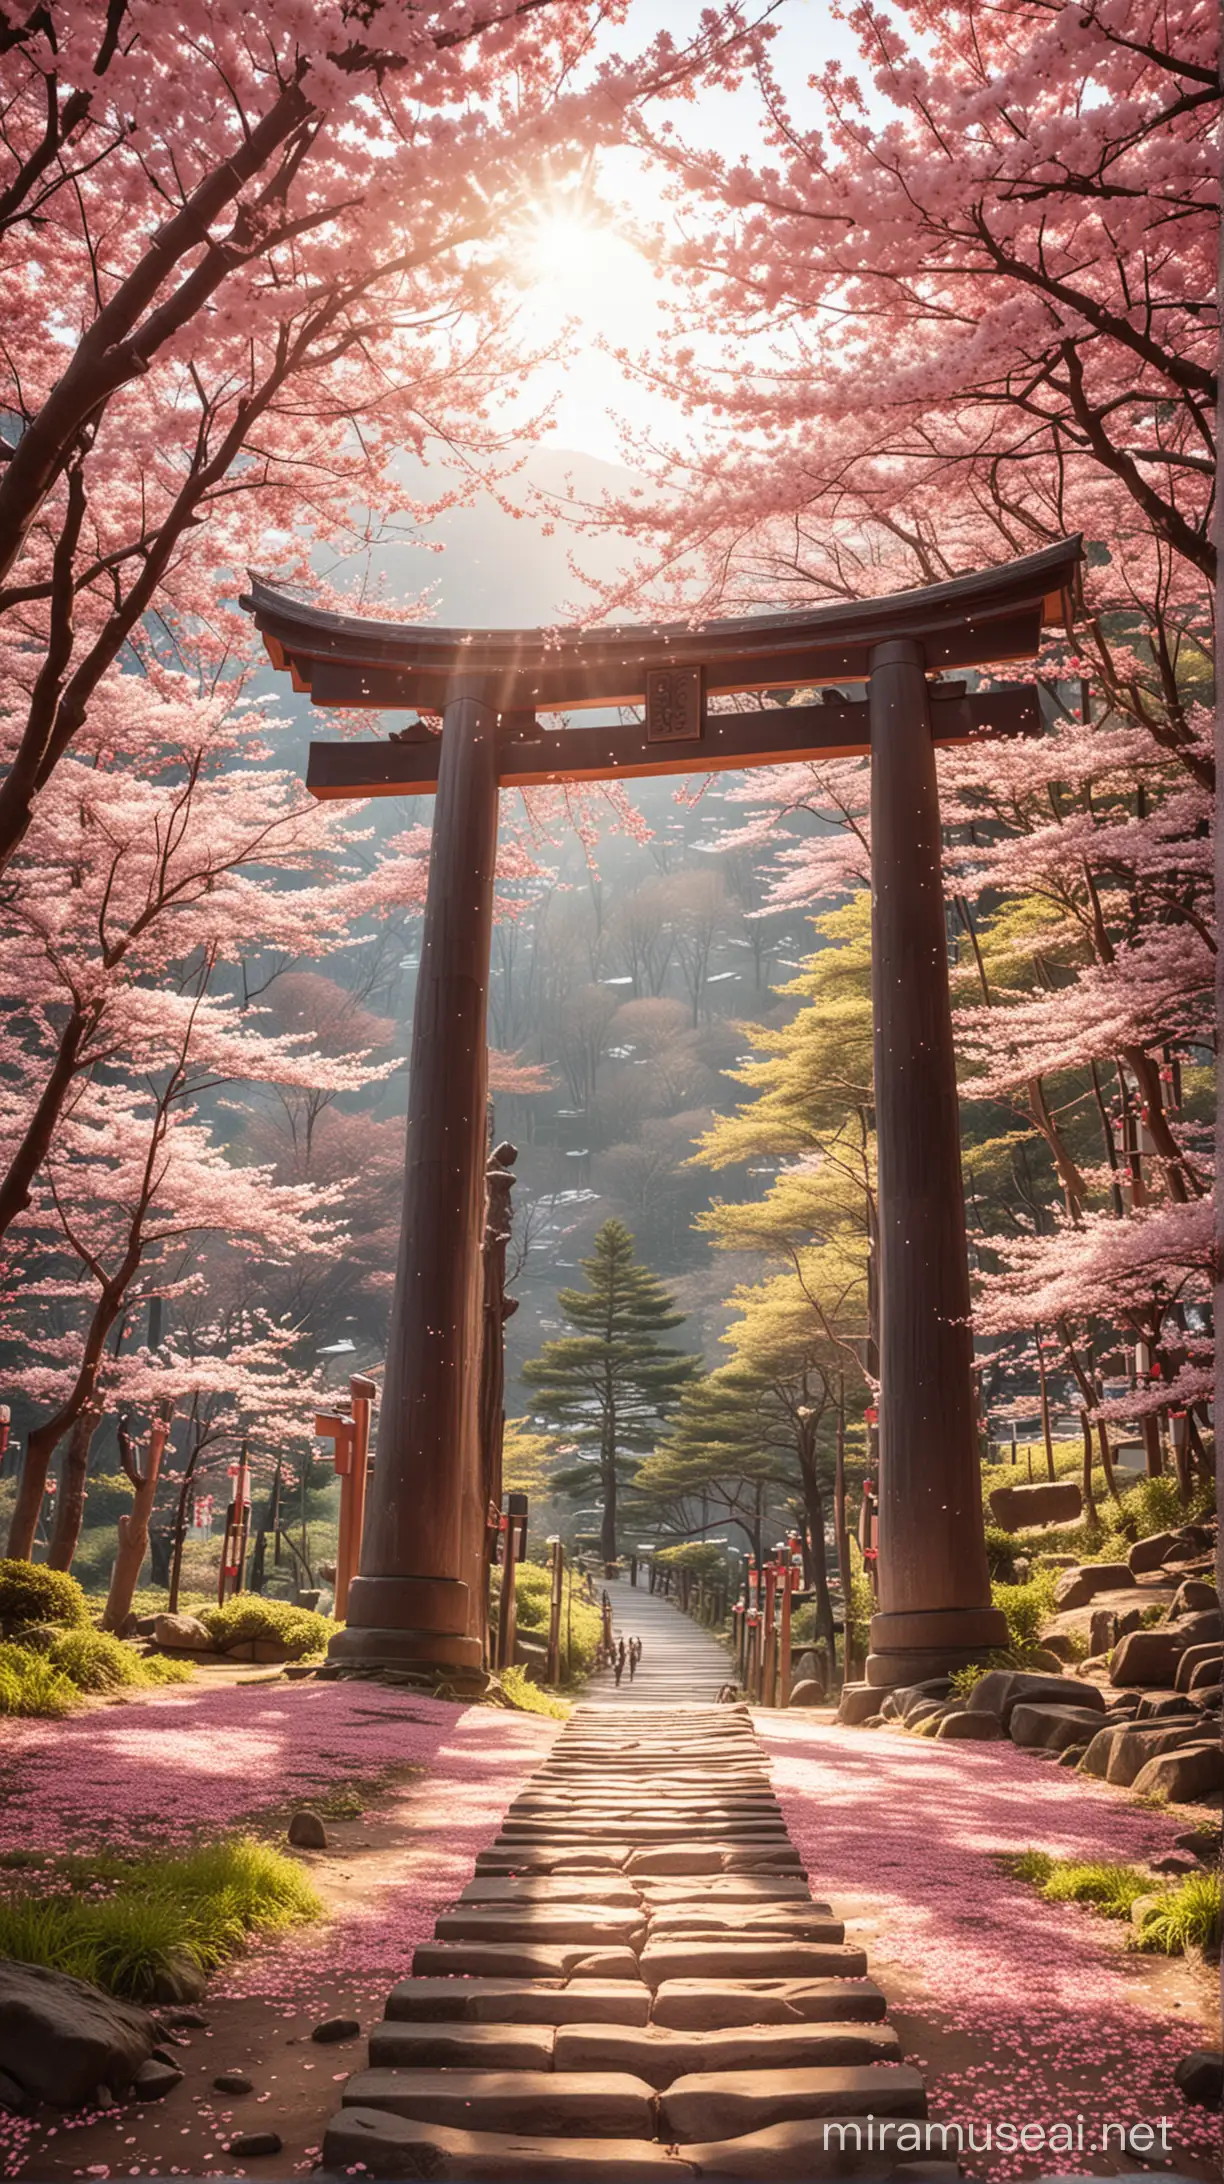 A breathtakingly beautiful real-life photograph of Nara Torii lined with bloomed cherry blossom trees, the plenty of cherry blossom petals, sunlight filtering through the petals creating a serene and magical atmosphere, masterpiece,best quality, highres, 8K photograph, Nikon